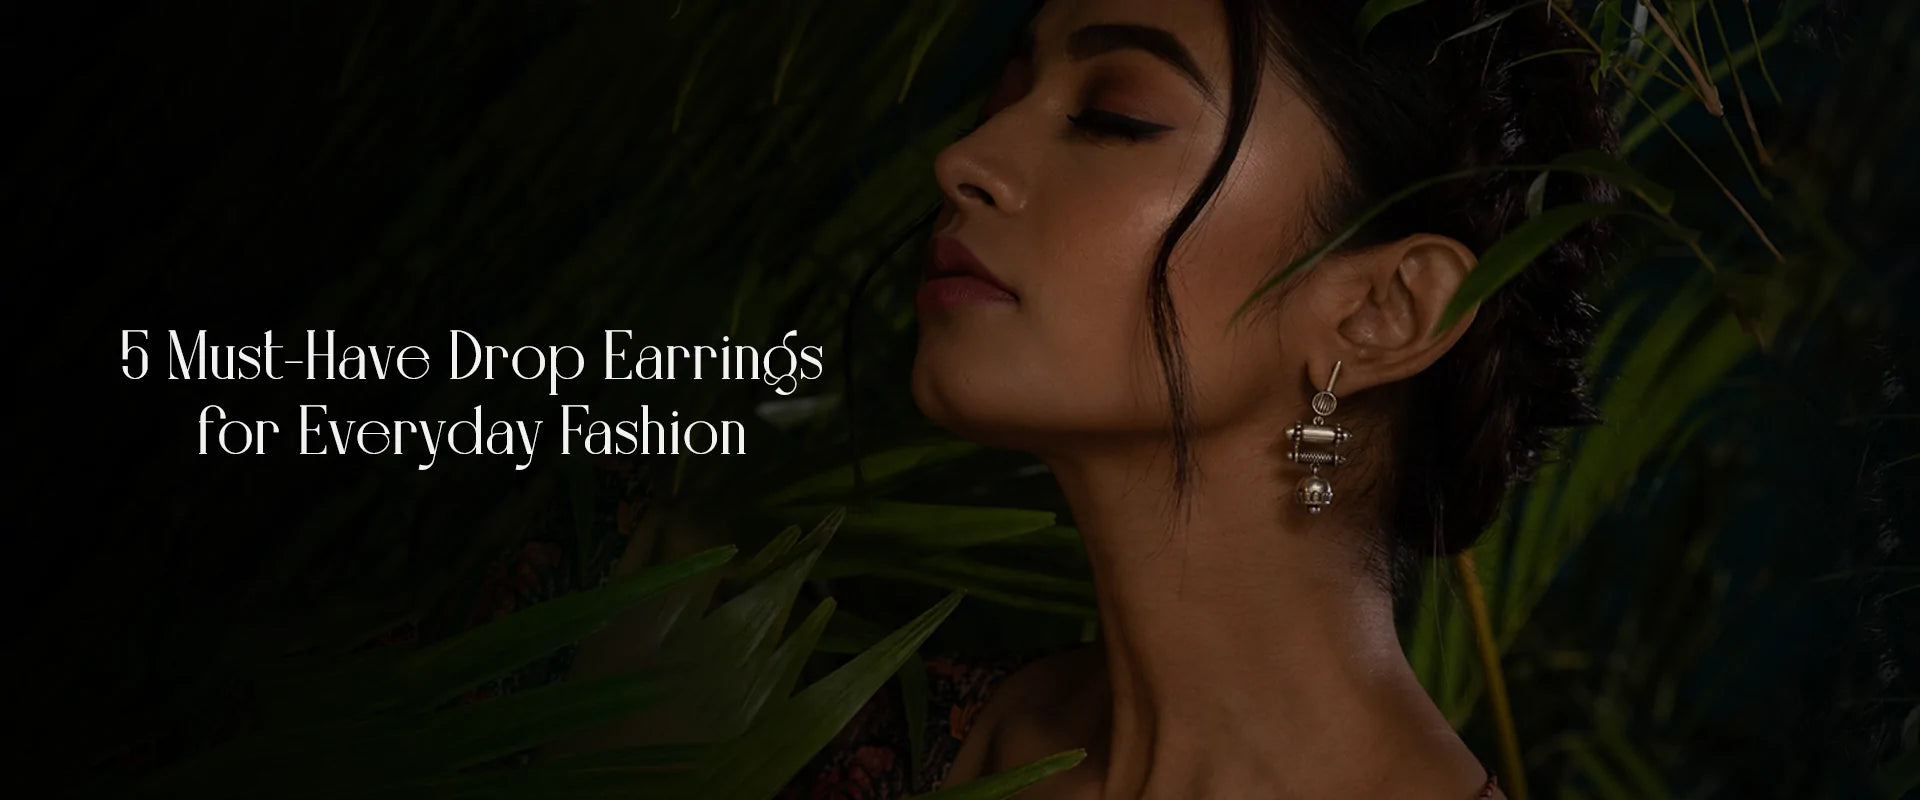 5 Must-Have Drop Earrings for Everyday Fashion